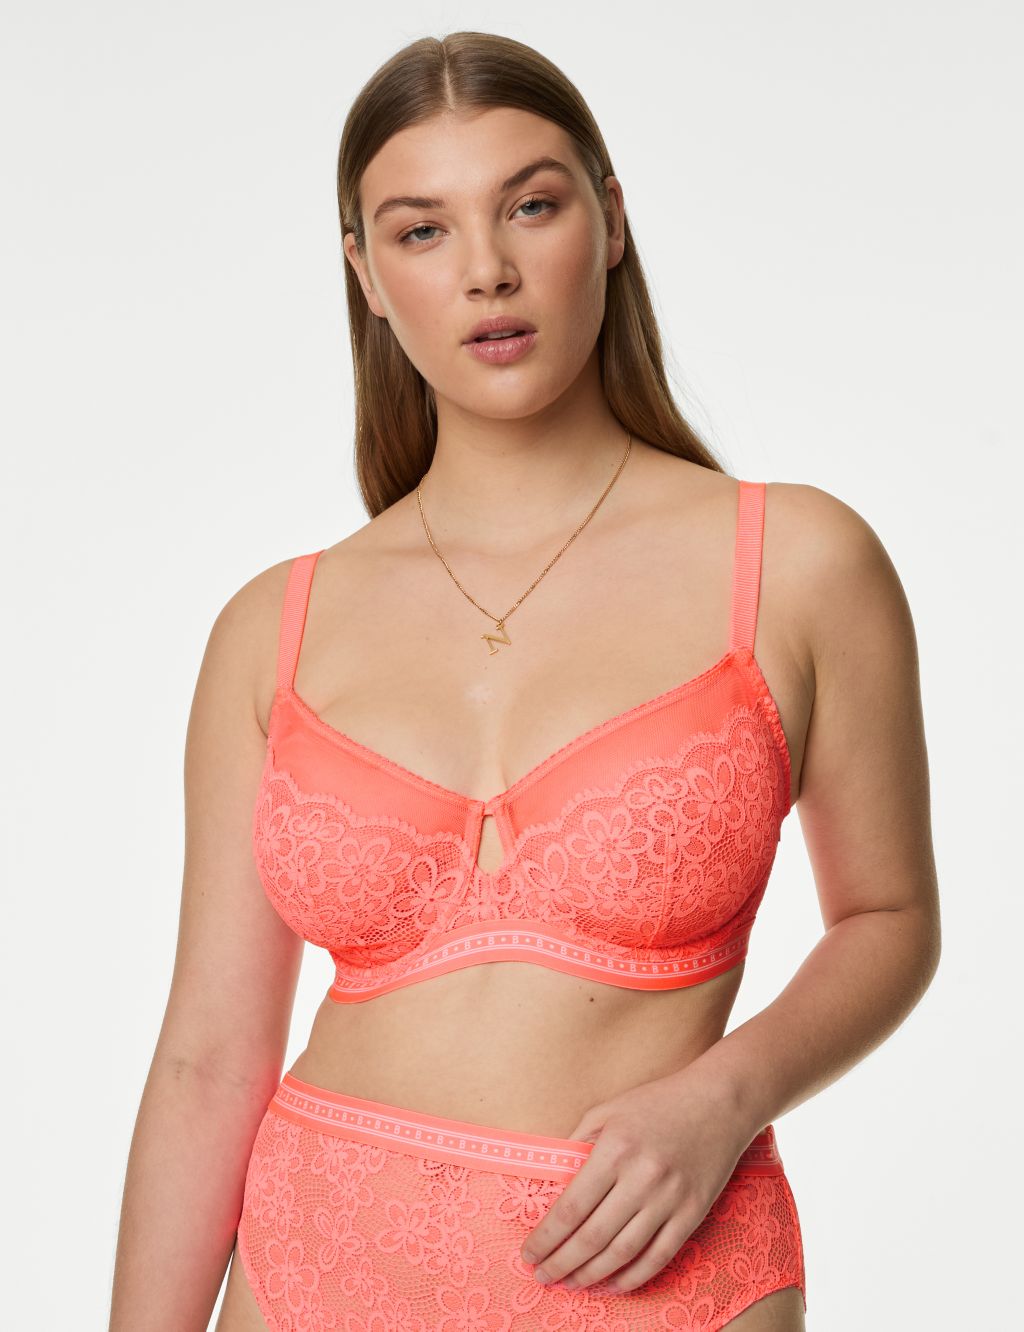 Spring bras are here to make your top drawer go BLOOM! Take your pick from  comfy to smoothing to sexy in 97 sizes!